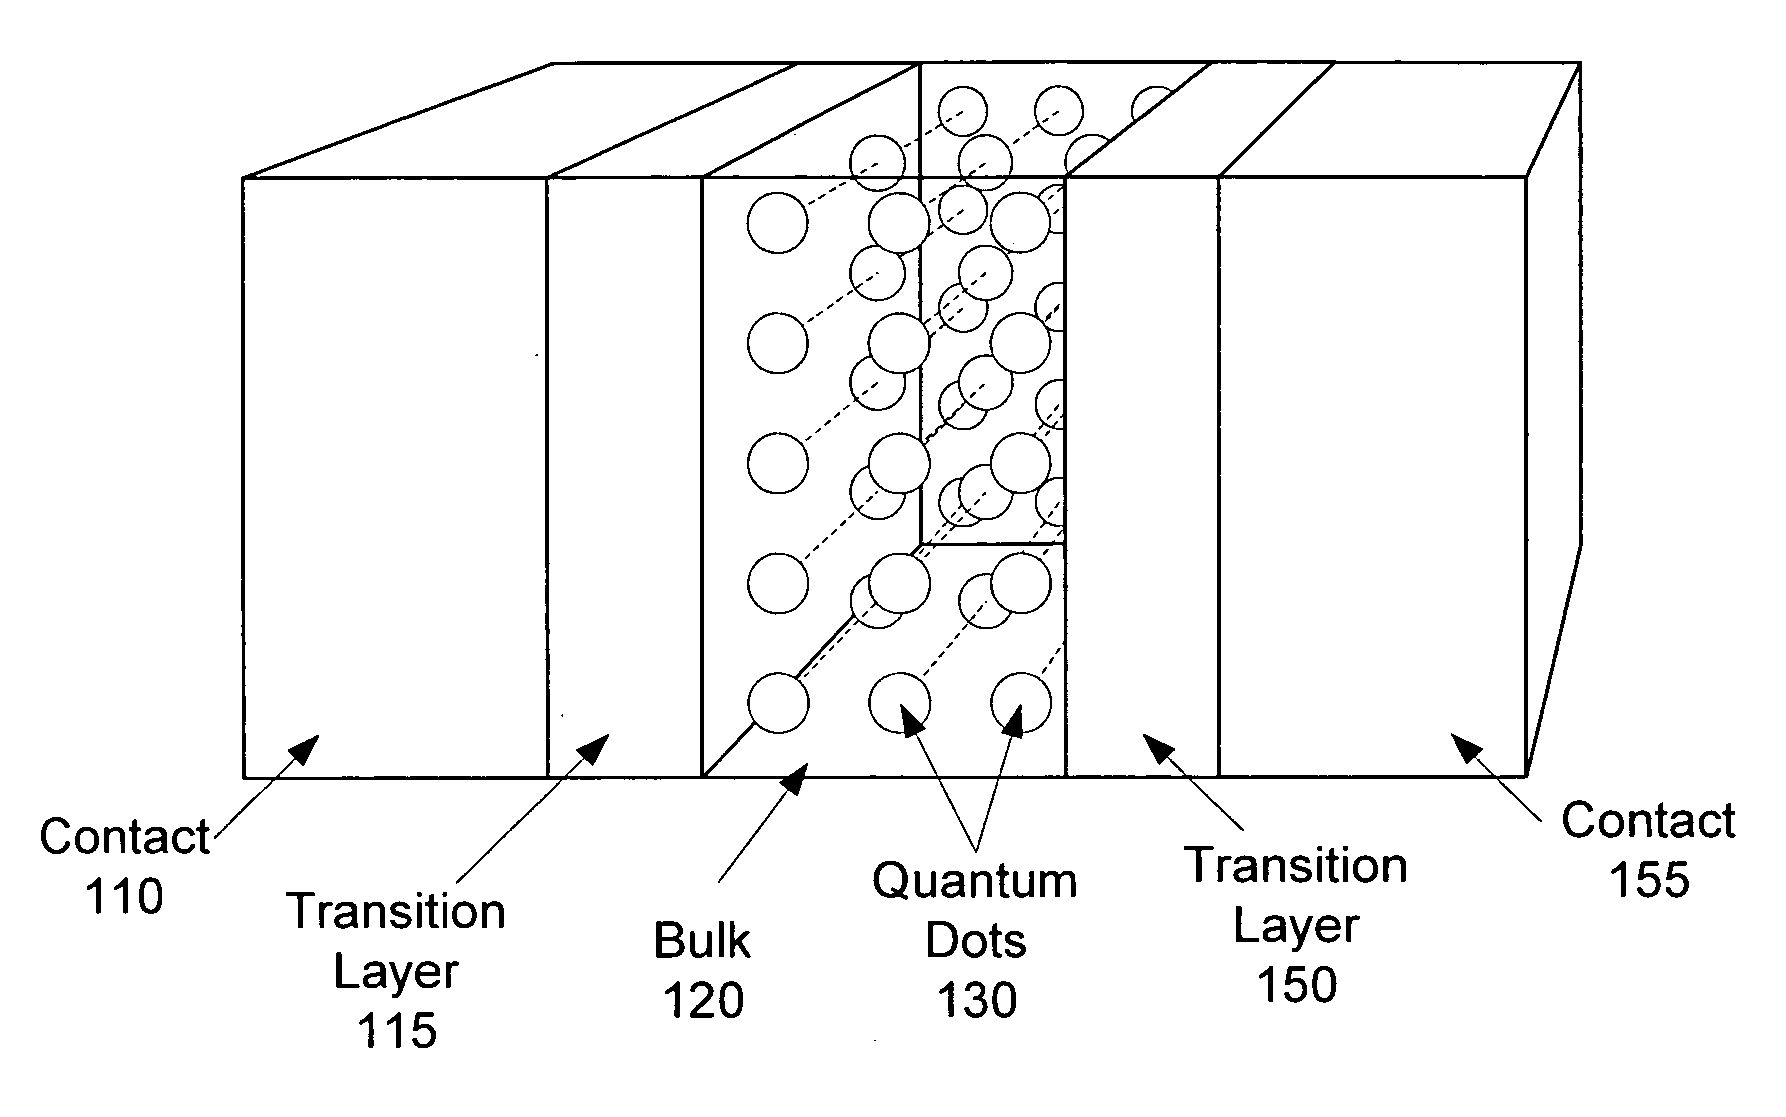 Intermediate-band photosensitive device with quantum dots having tunneling barrier embedded in organic matrix